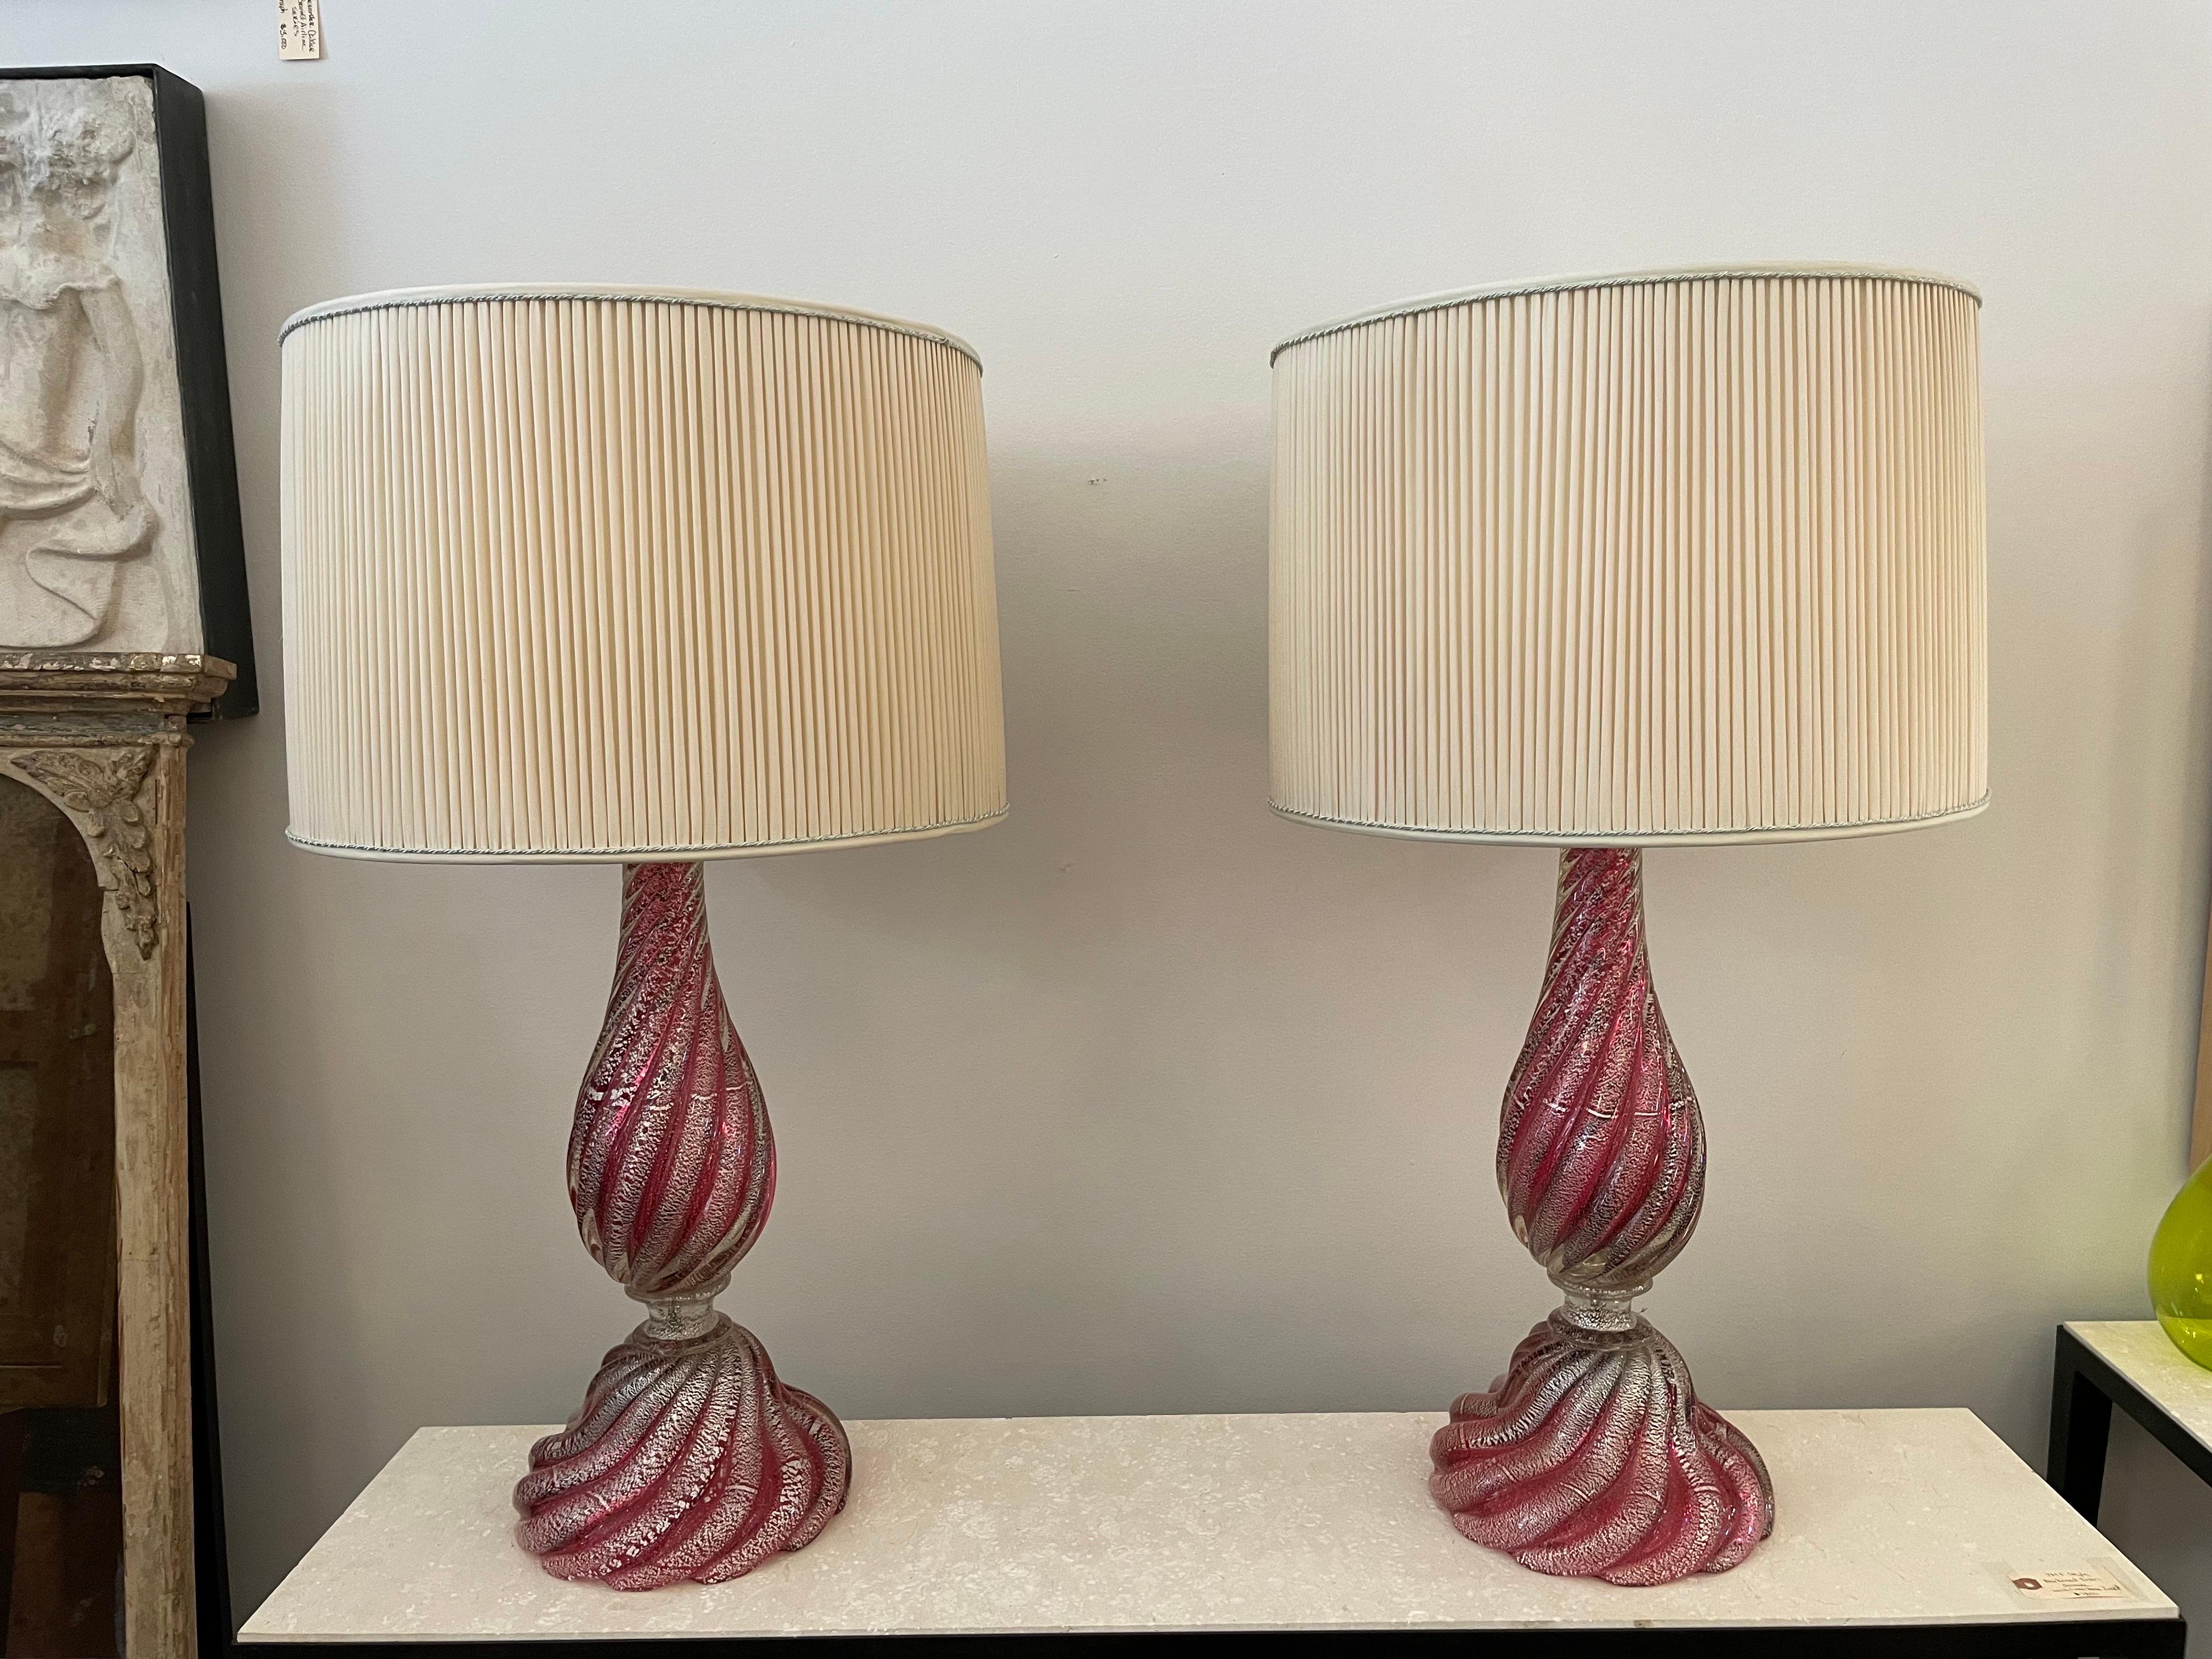 These are an elegant pair of raspberry hue Murano glass lamps with silver foil inclusions throughout. Beautiful swirled base and body - illuminated or not, they make a stunning statement. Pleated shades shown are NOT INCLUDED but can be purchased